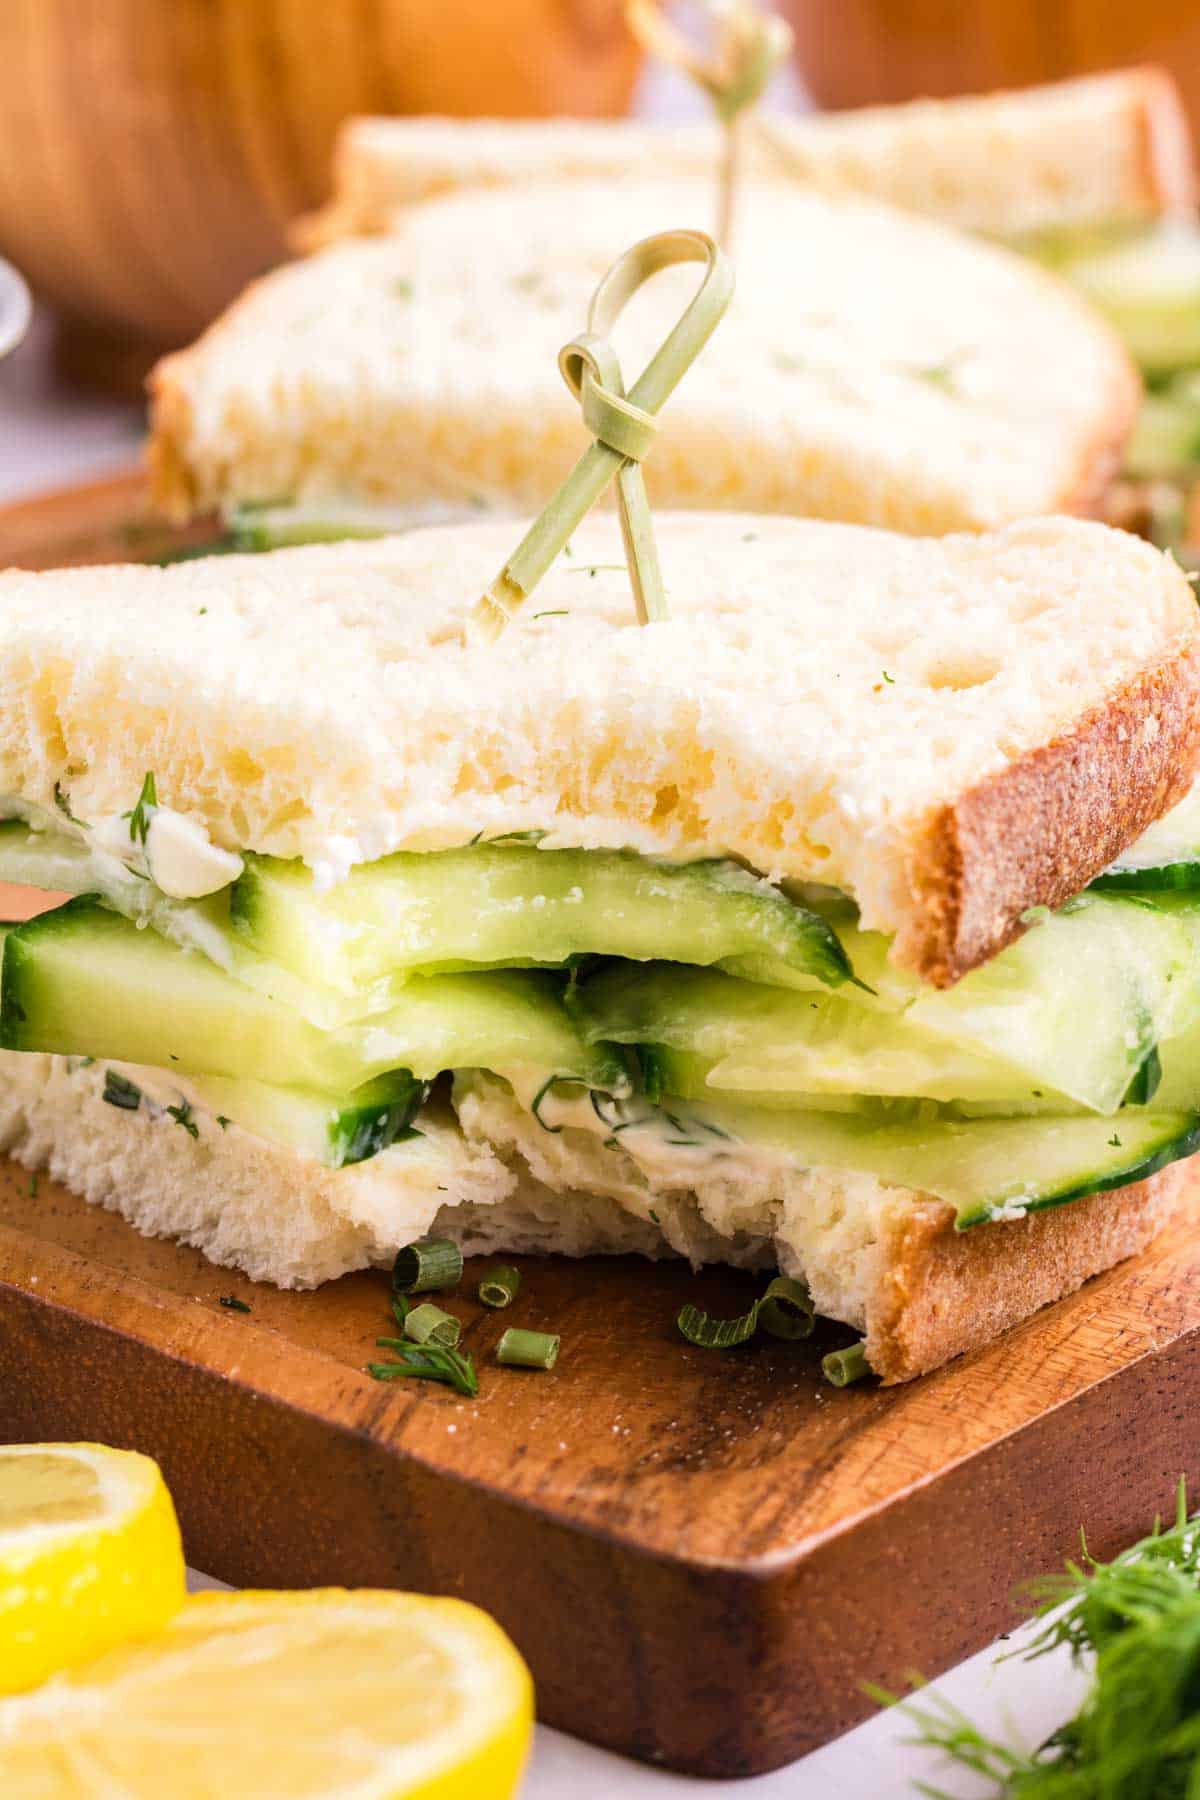 A cucumber sandwich with a bite taken from the sandwich.